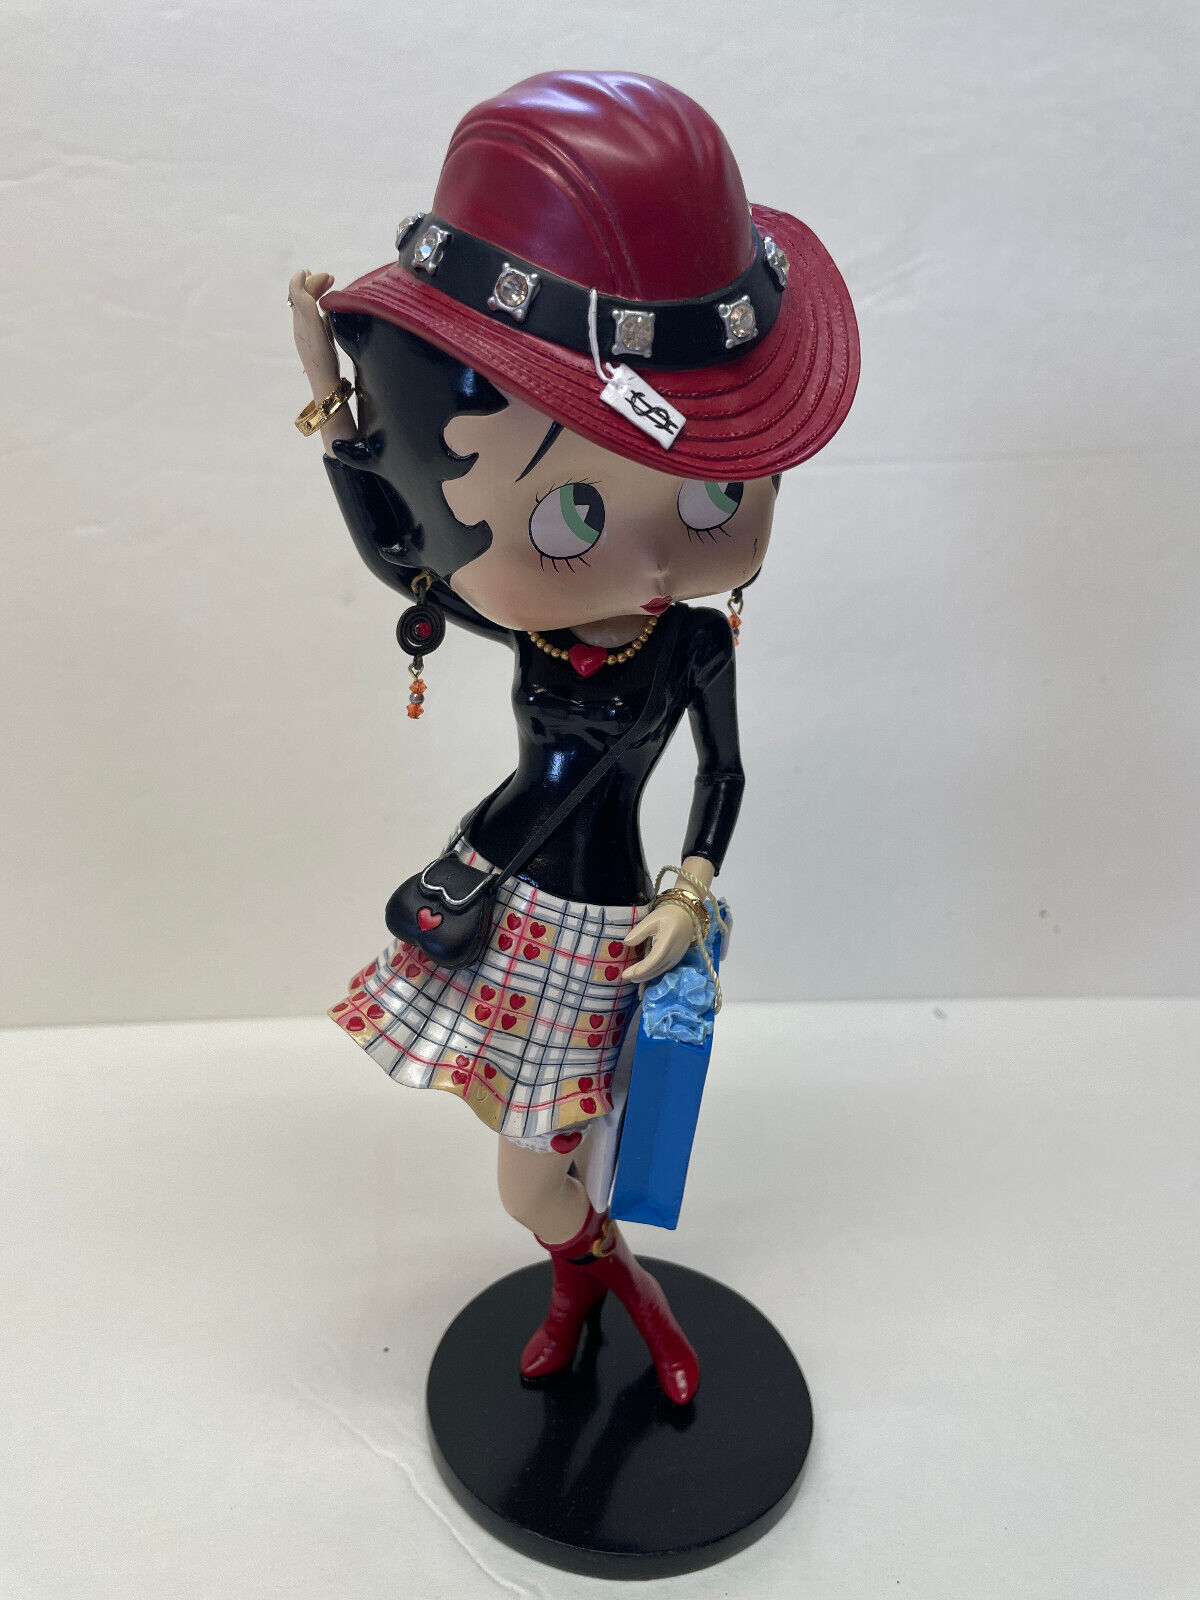 Vintage Betty Boop Figurines-Danbury Mint-Separately Priced -Your Choice